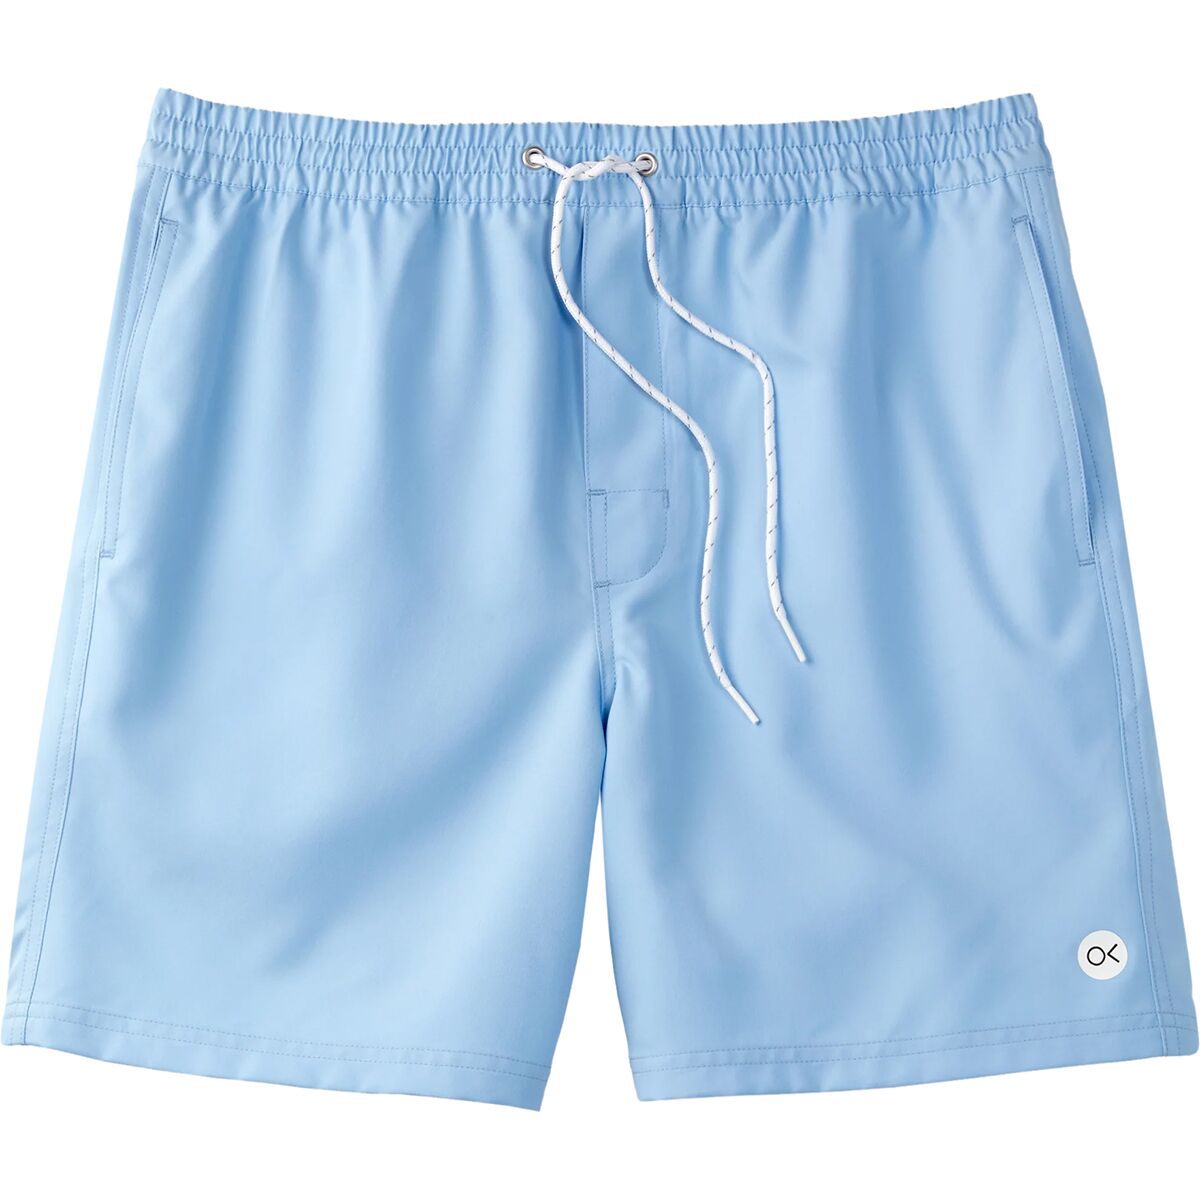 Outerknown Nomadic Volly Short - Men's - Clothing